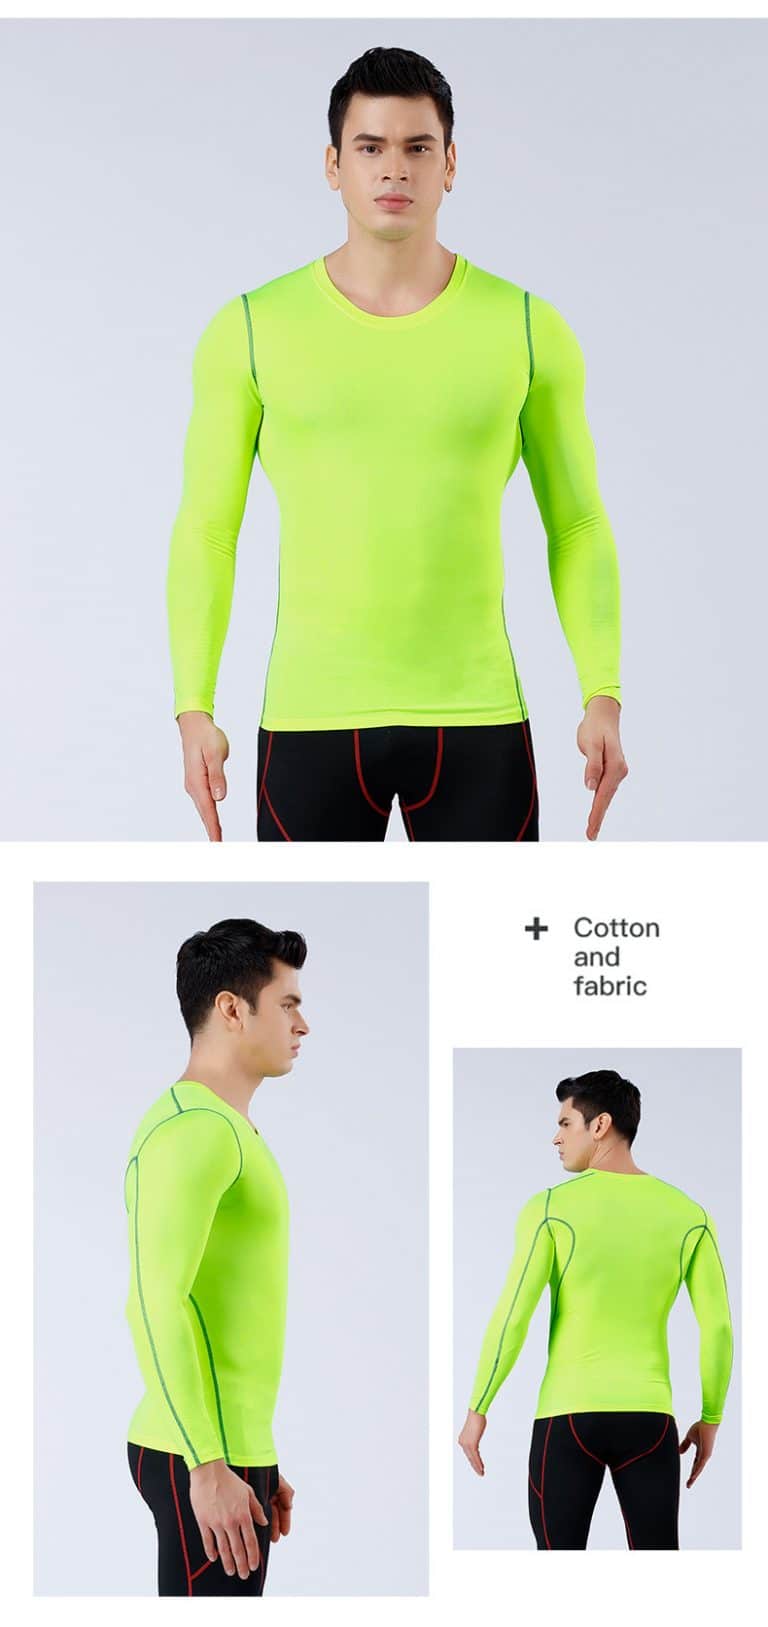 13376593390 1462654320 - Home - Wholesale Fitness Clothing Manufacturer